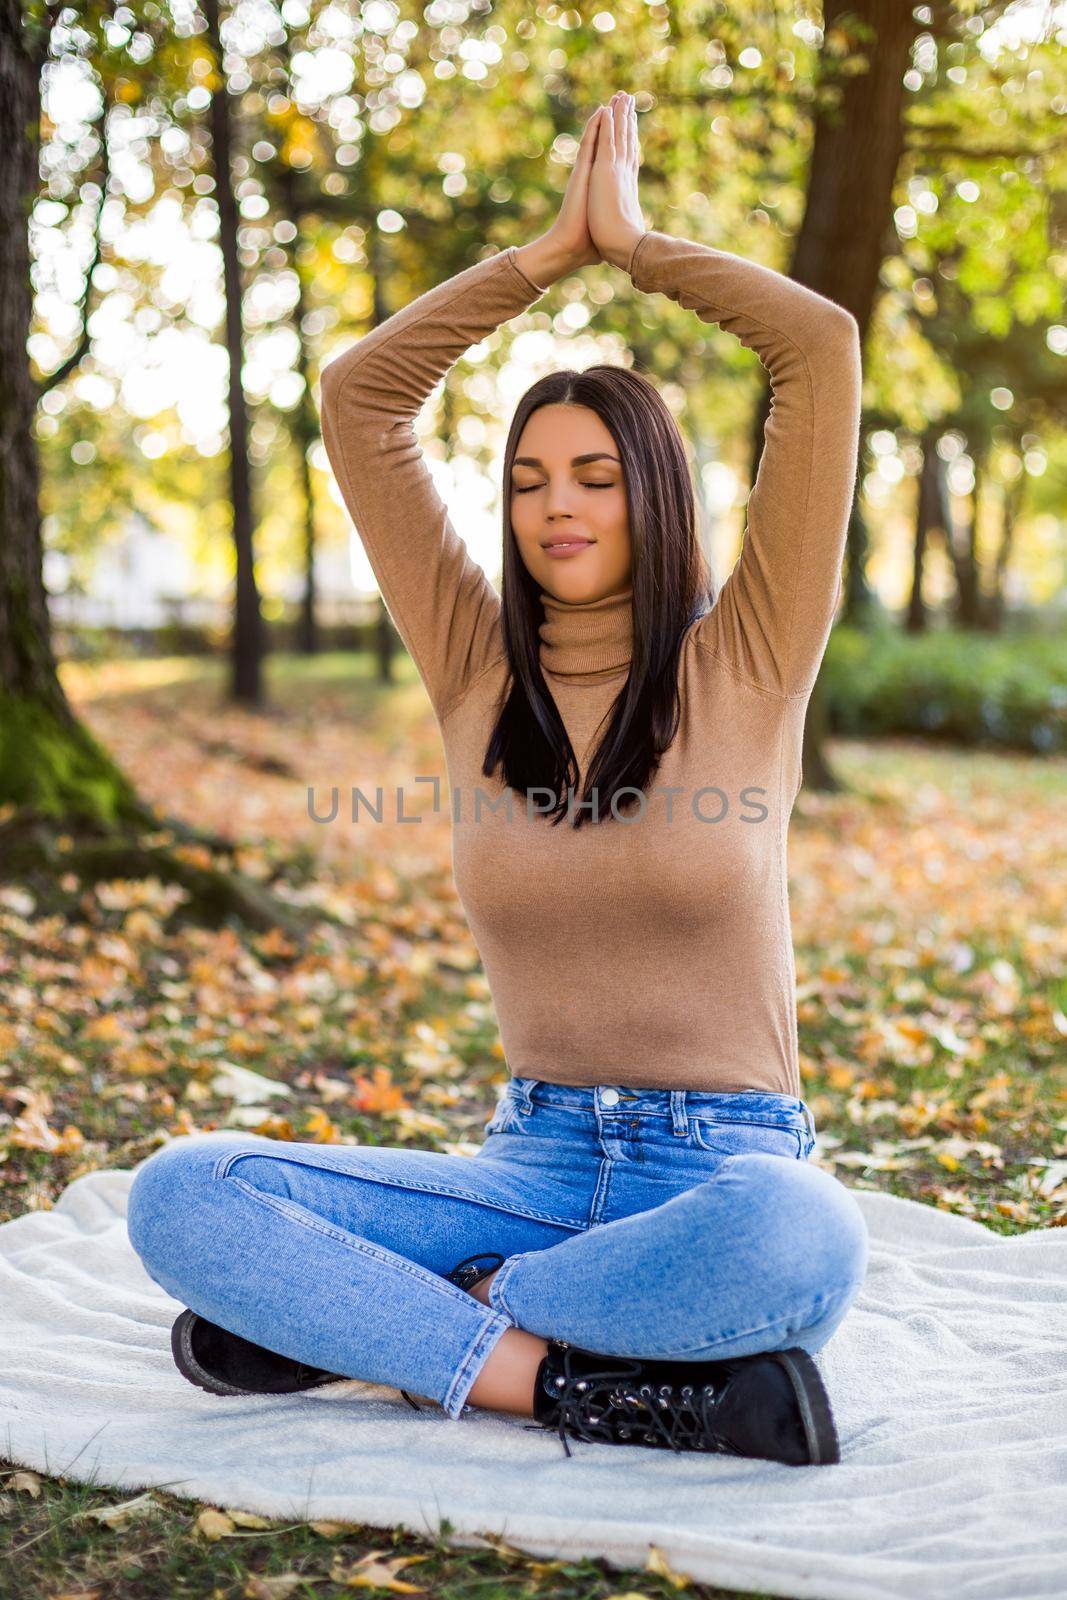 Beautiful woman meditating while resting and enjoys in autumn in the park.